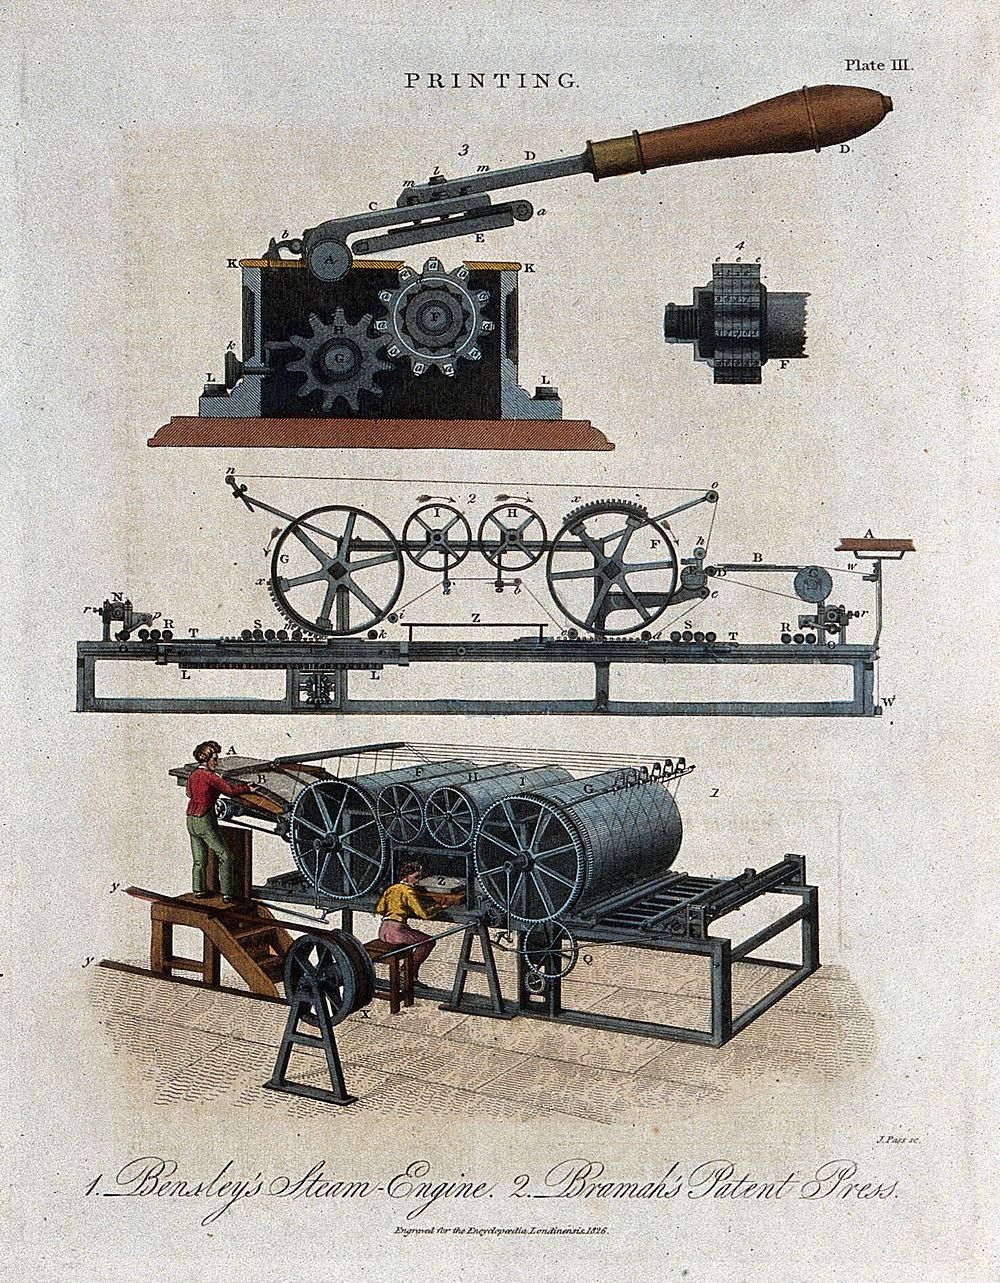 Printing: section and details of the Bramah numerator press for banknote production (above), steam-engine (below). Engraving…